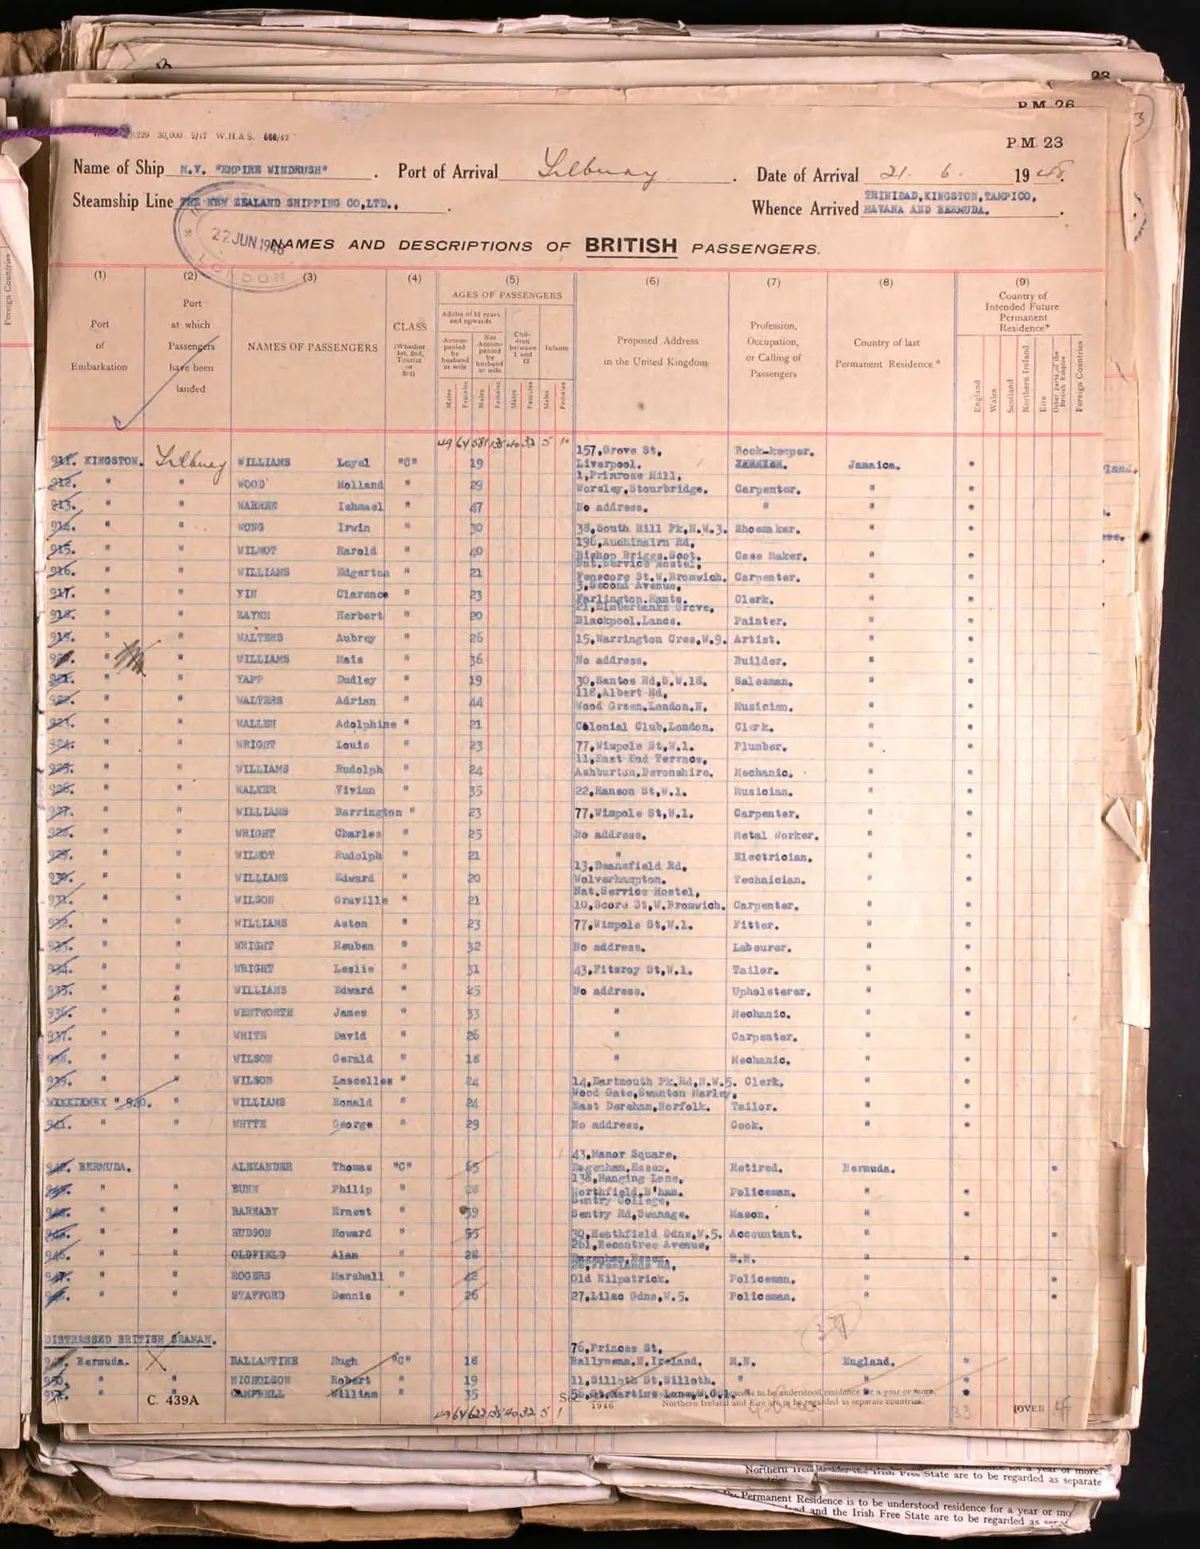  Windrush passenger list, 1948, available from Ancestry Jamaican ancestry